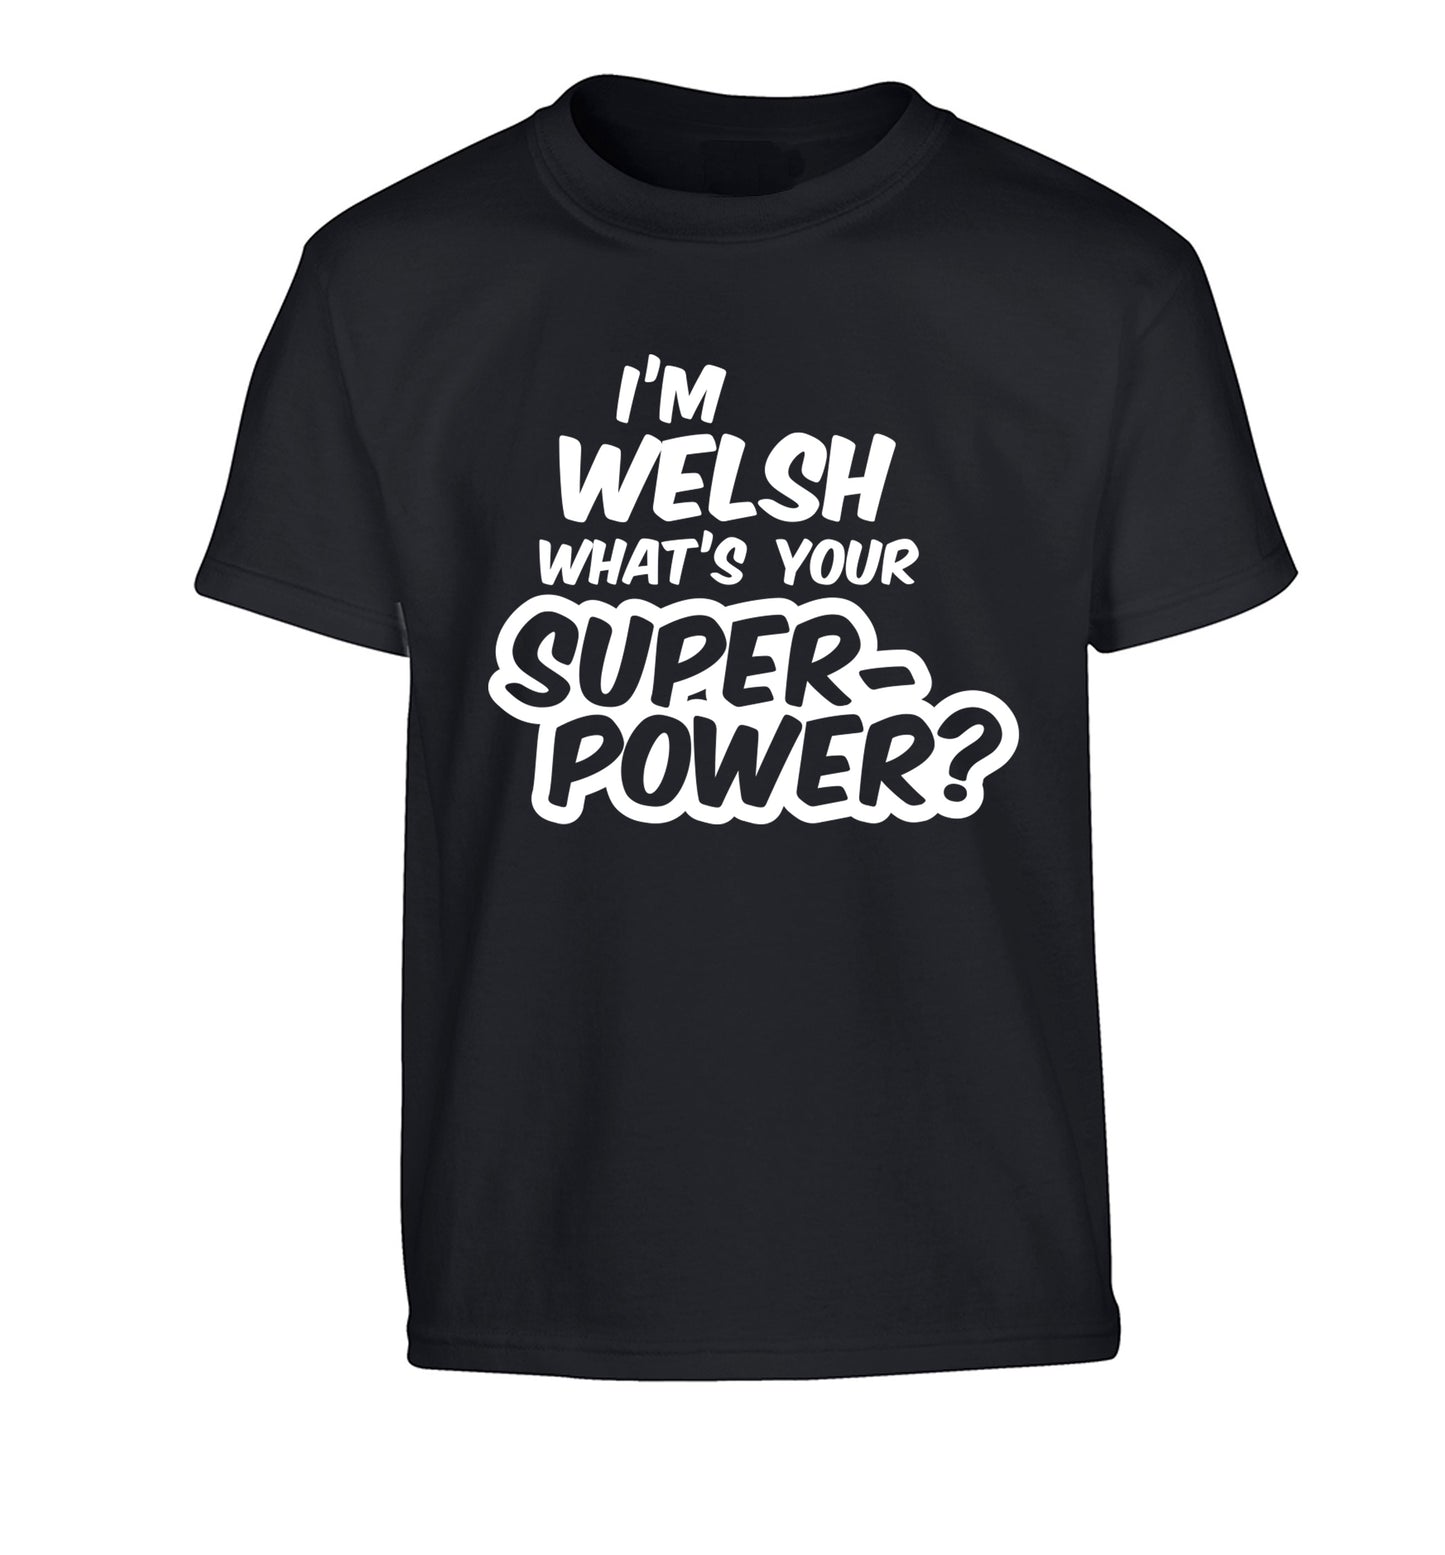 I'm Welsh what's your superpower? Children's black Tshirt 12-13 Years